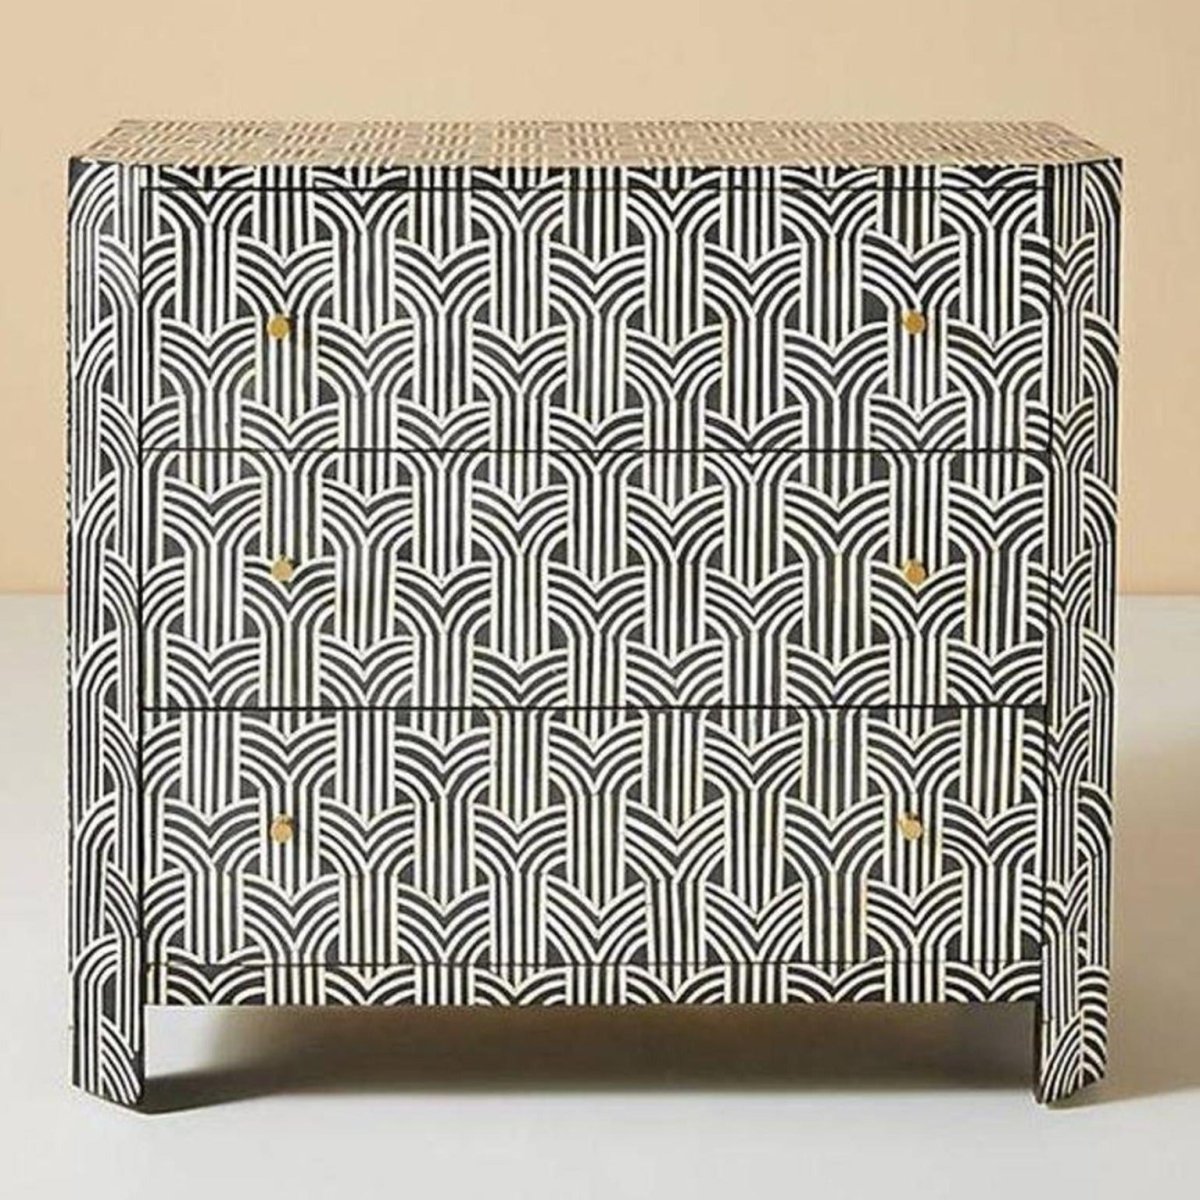 Bone Inlay Chest of 3 Drawers in Black Color | Handmade Chevron patterned 3 Drawers Dresser chest of drawer - Bone Inlay Furnitures